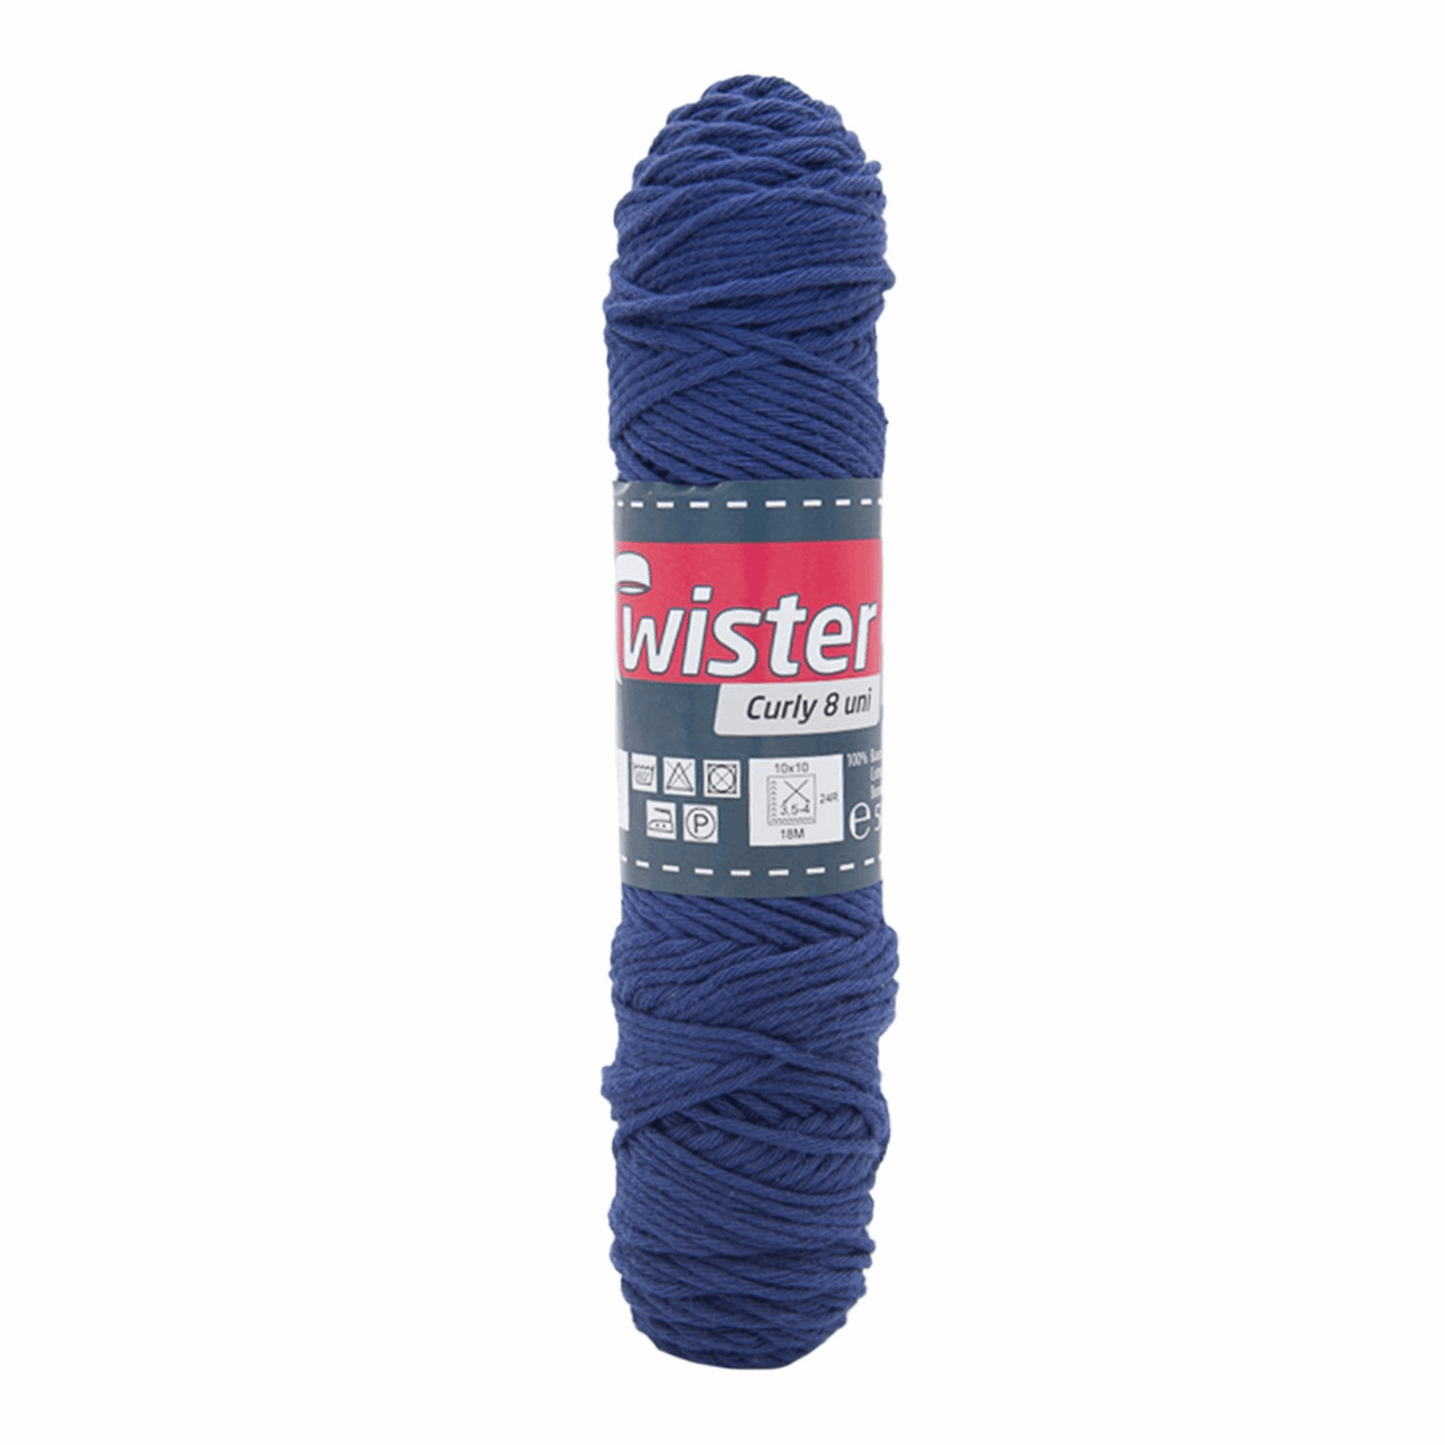 Twister Curly 8 50g, marine, 98302, Farbe 59